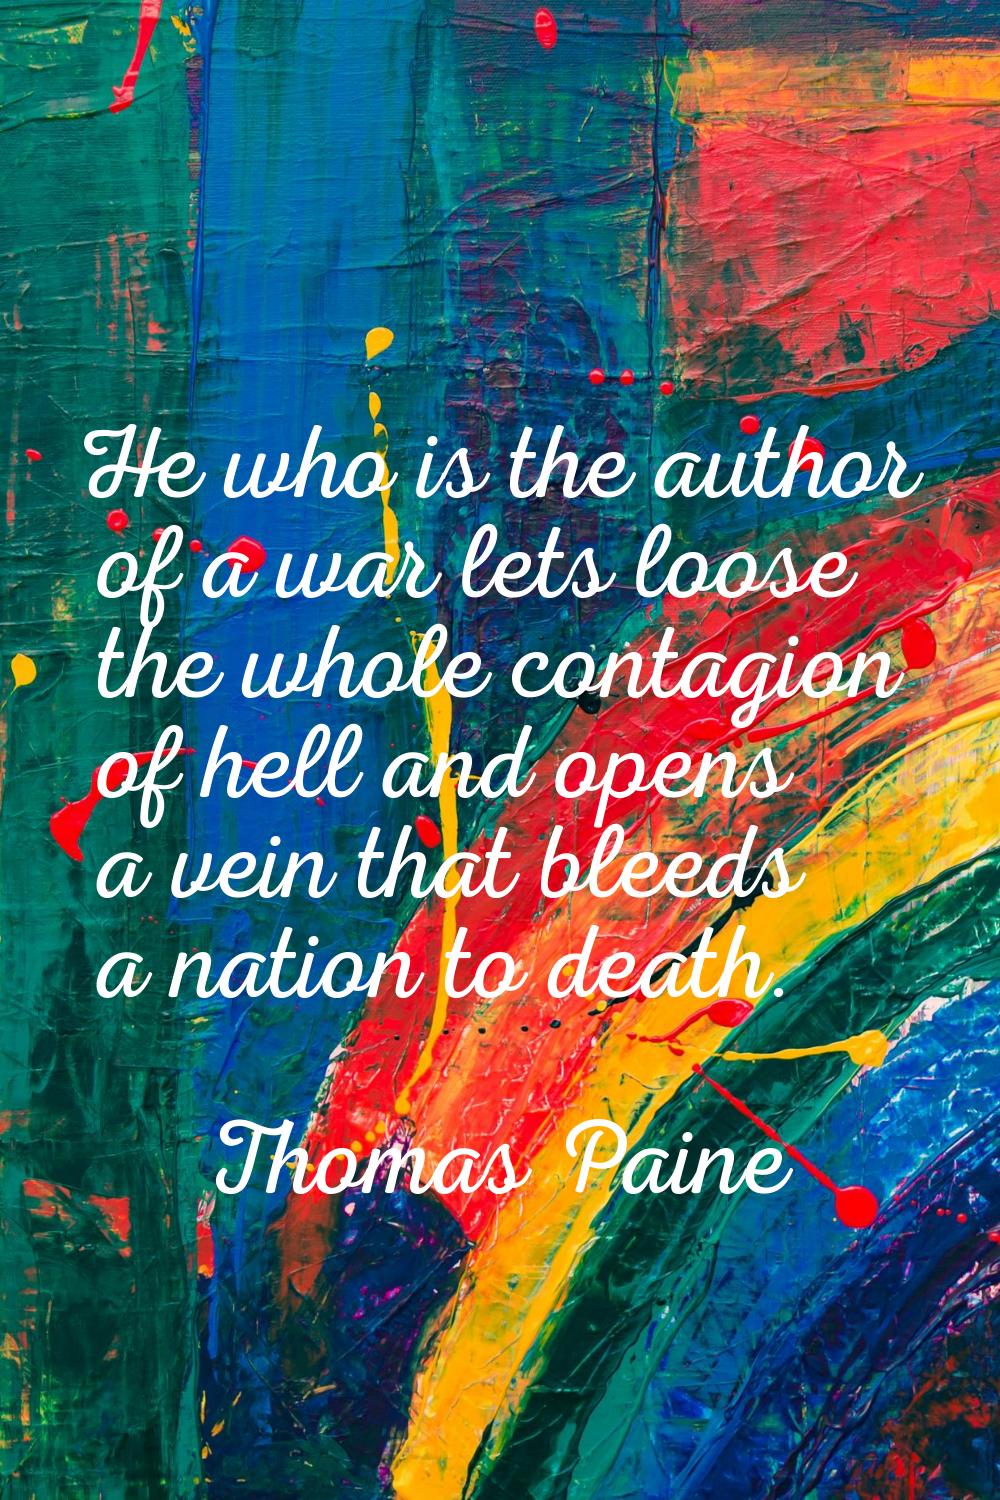 He who is the author of a war lets loose the whole contagion of hell and opens a vein that bleeds a